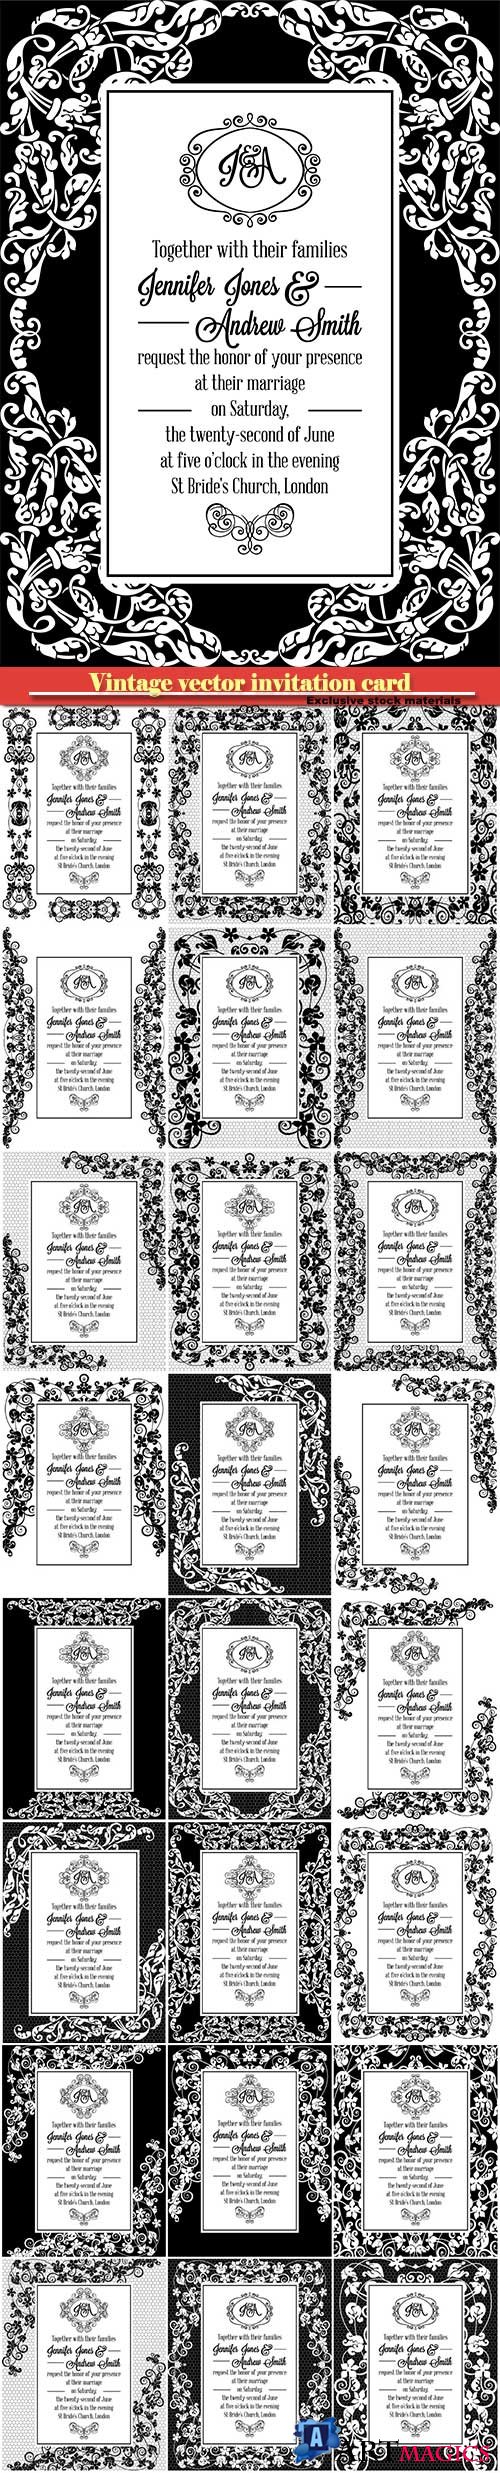 Vintage vector invitation card with black and white lacy design for wedding